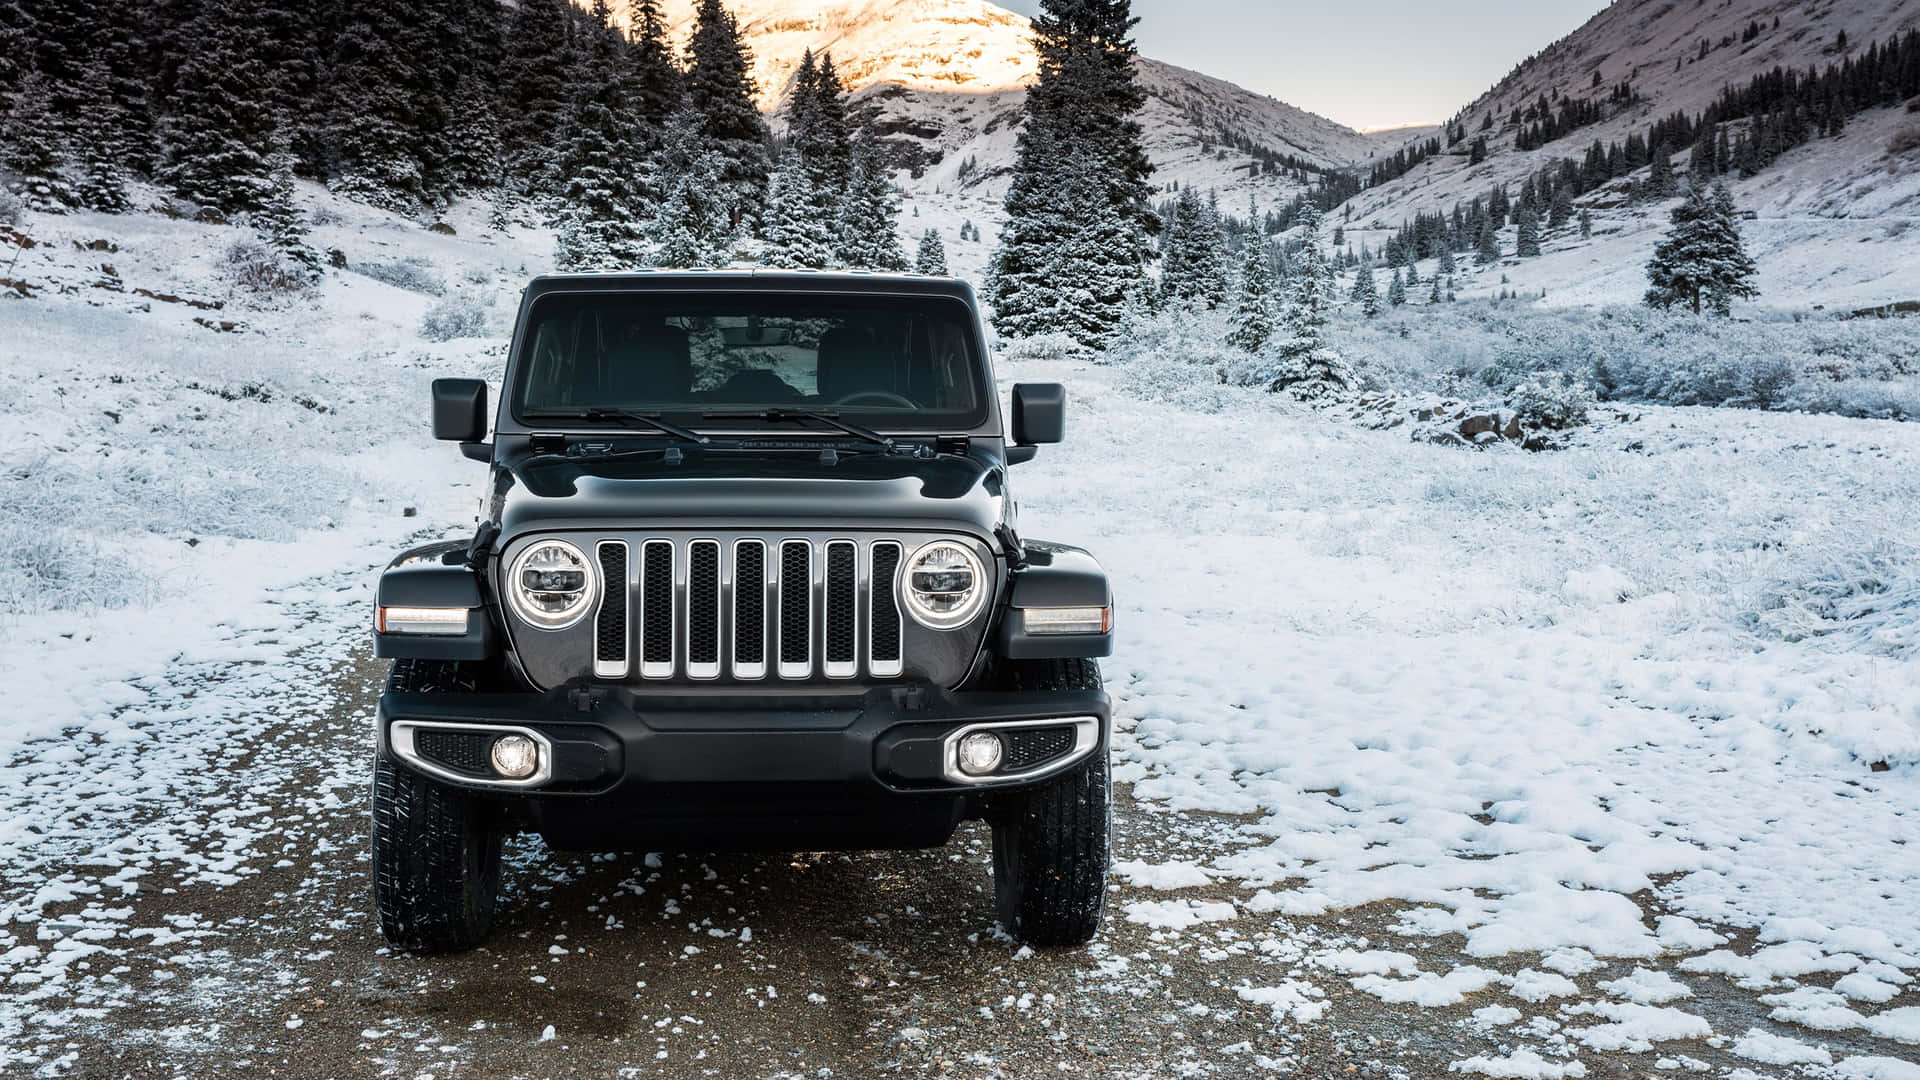 A Rugged, All-Terrain Jeep Perfect for Exploring